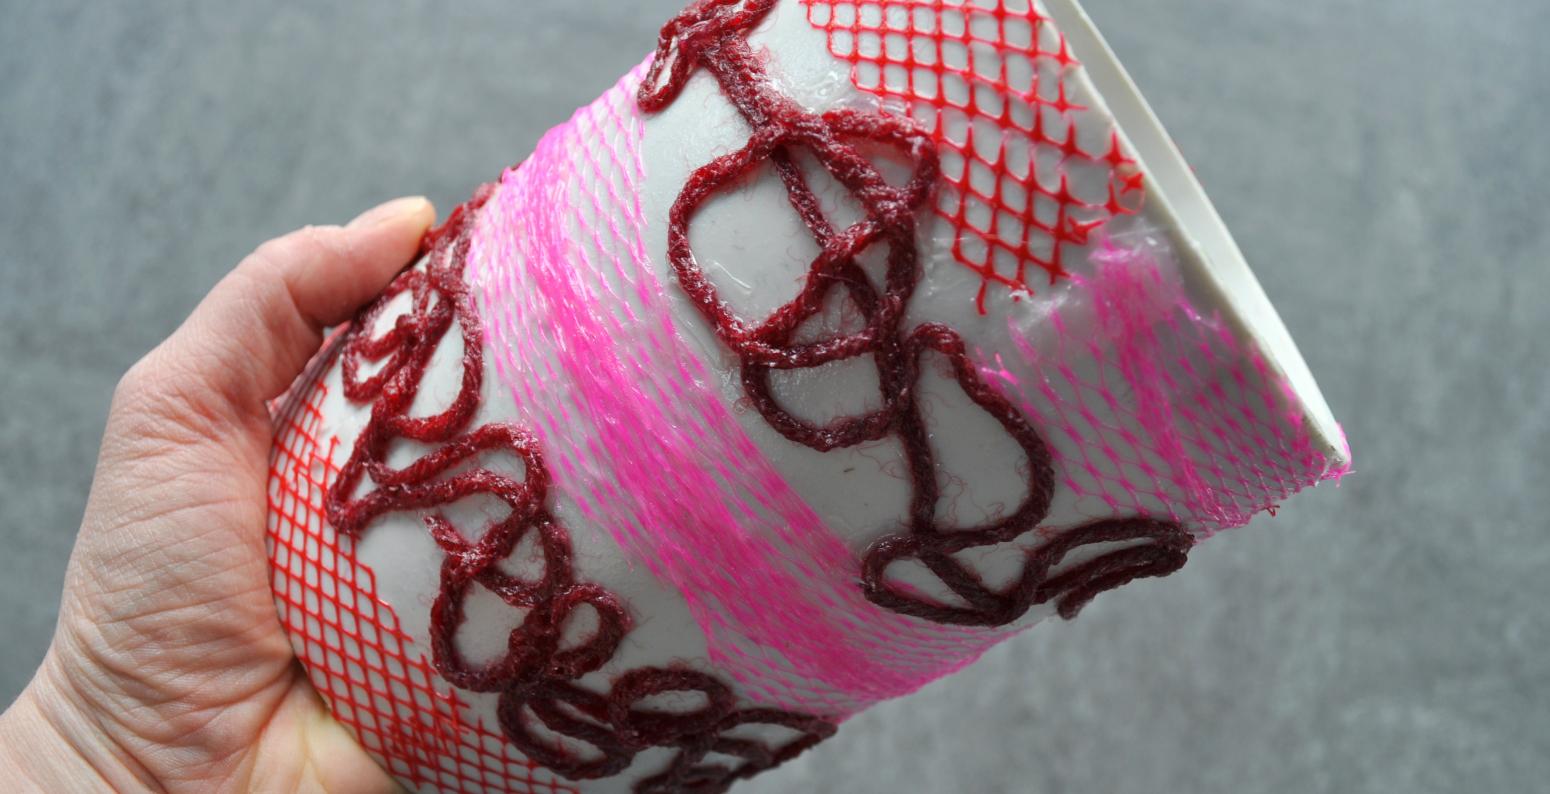 A hand holding a homemade printmaking tool, where a yarns and plastic mesh have been attached to a large PVC pipe.